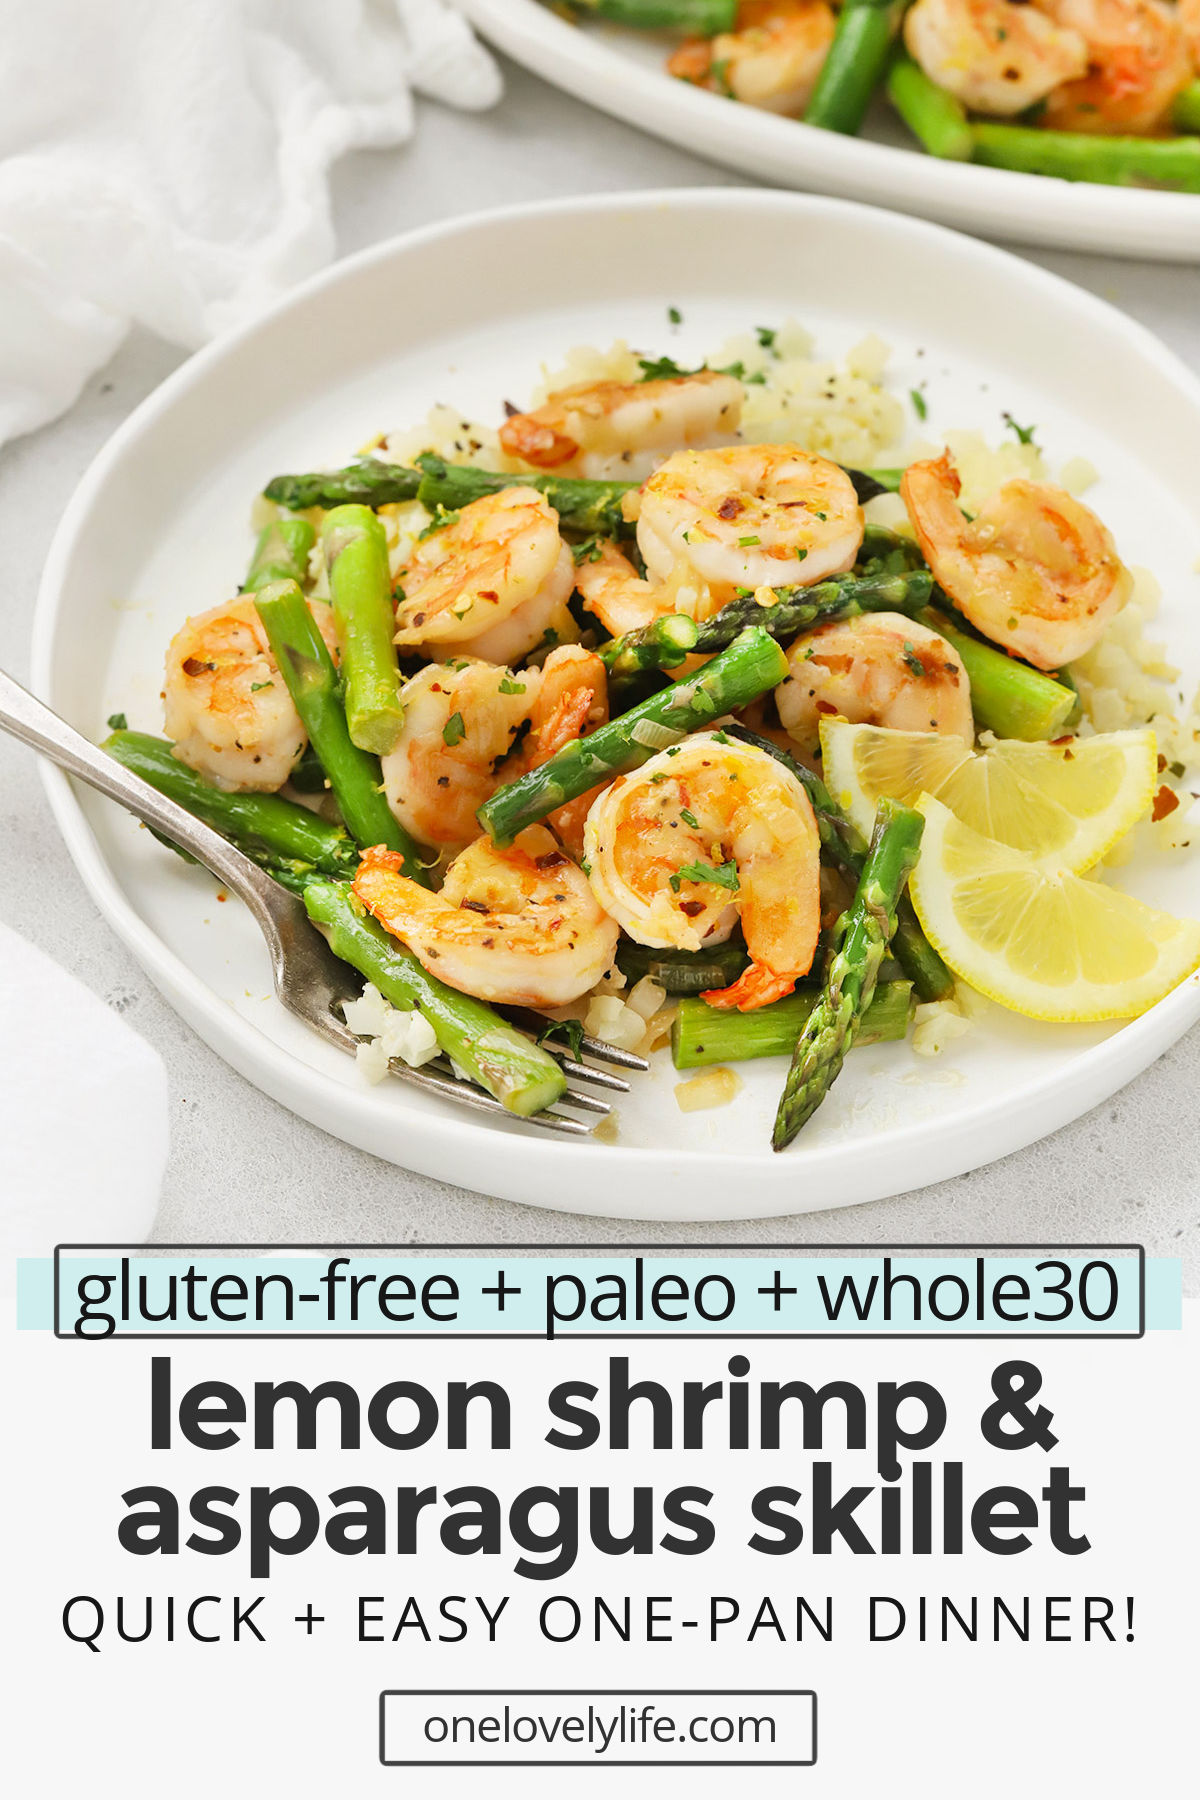 Lemon Shrimp & Asparagus Skillet - This one pan lemon shrimp with asparagus comes together quickly and packs in SO much gorgeous flavor. It's a weeknight wonder! (Gluten-Free, Paleo & Whole30-Friendly) // Shrimp recipe // Low carb dinner // one pan dinner // healthy dinner // paleo dinner // whole30 dinner // skillet recipe #shrimp #onepan #healthydinner #lowcarb #glutenfree #paleo #whole30